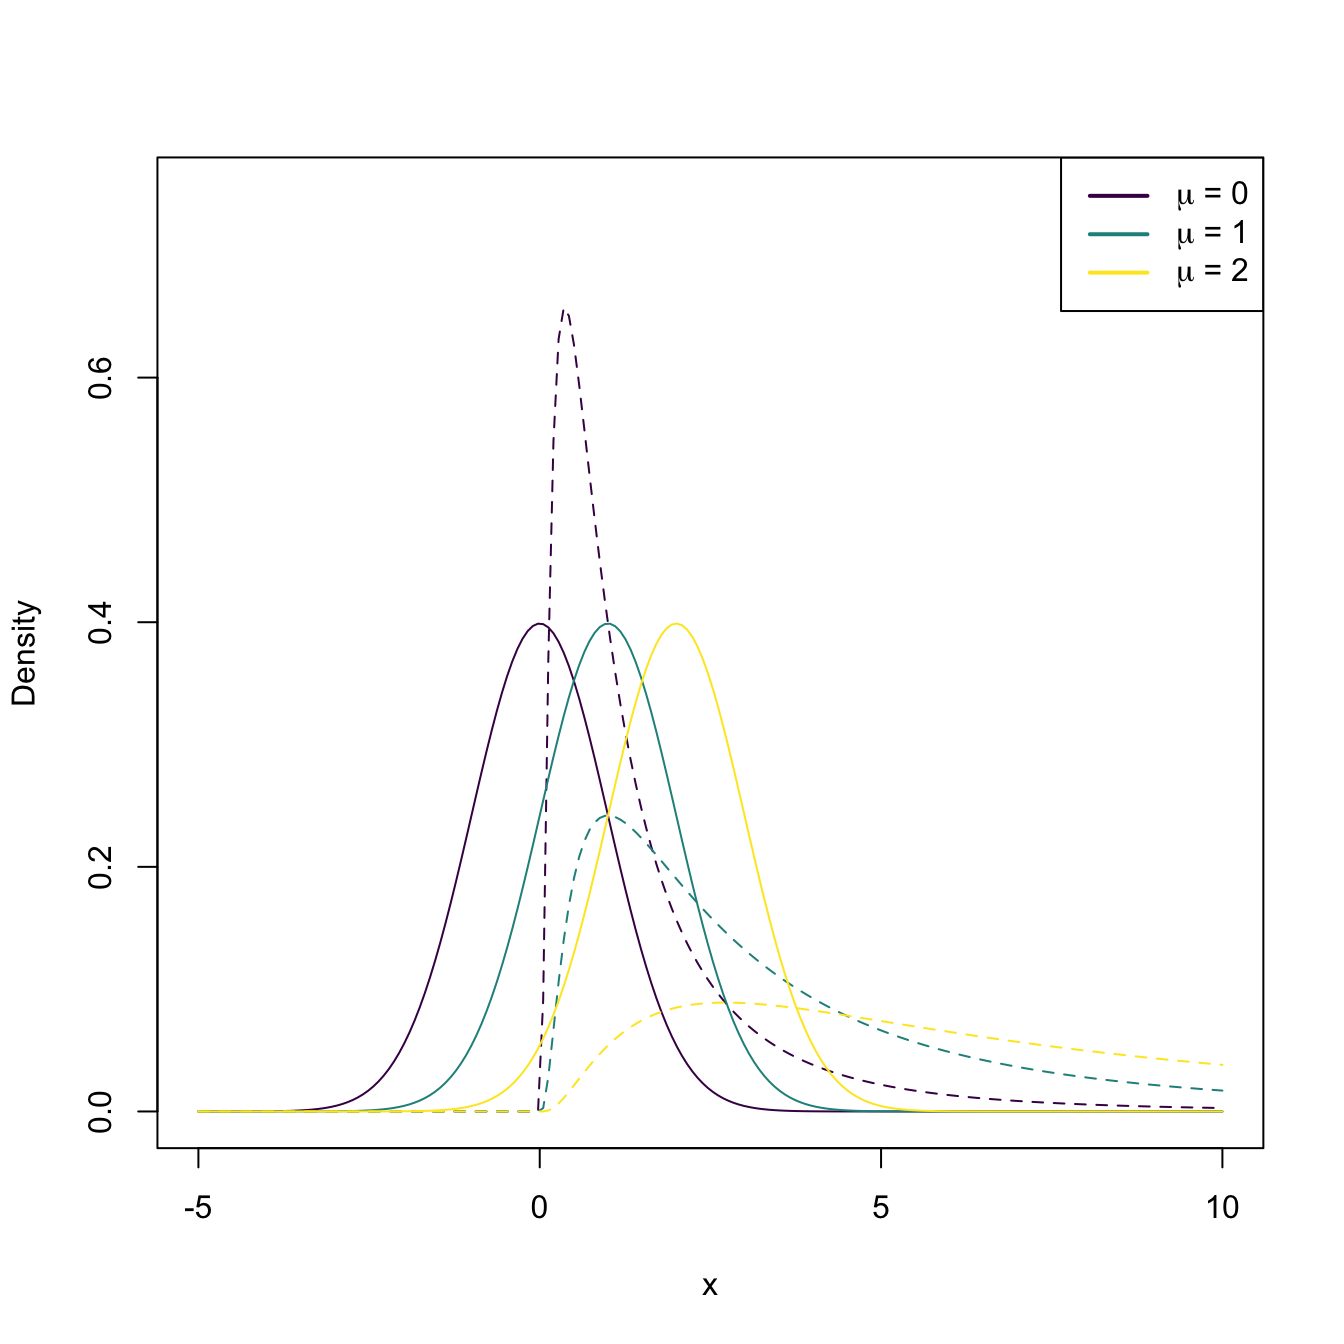 The pdf of \(X\sim\mathcal{N}(\mu,1)\) (solid lines) and the pdf of \(Y=X^2\) (dashed lines), for a range of values of \(\mu\). 